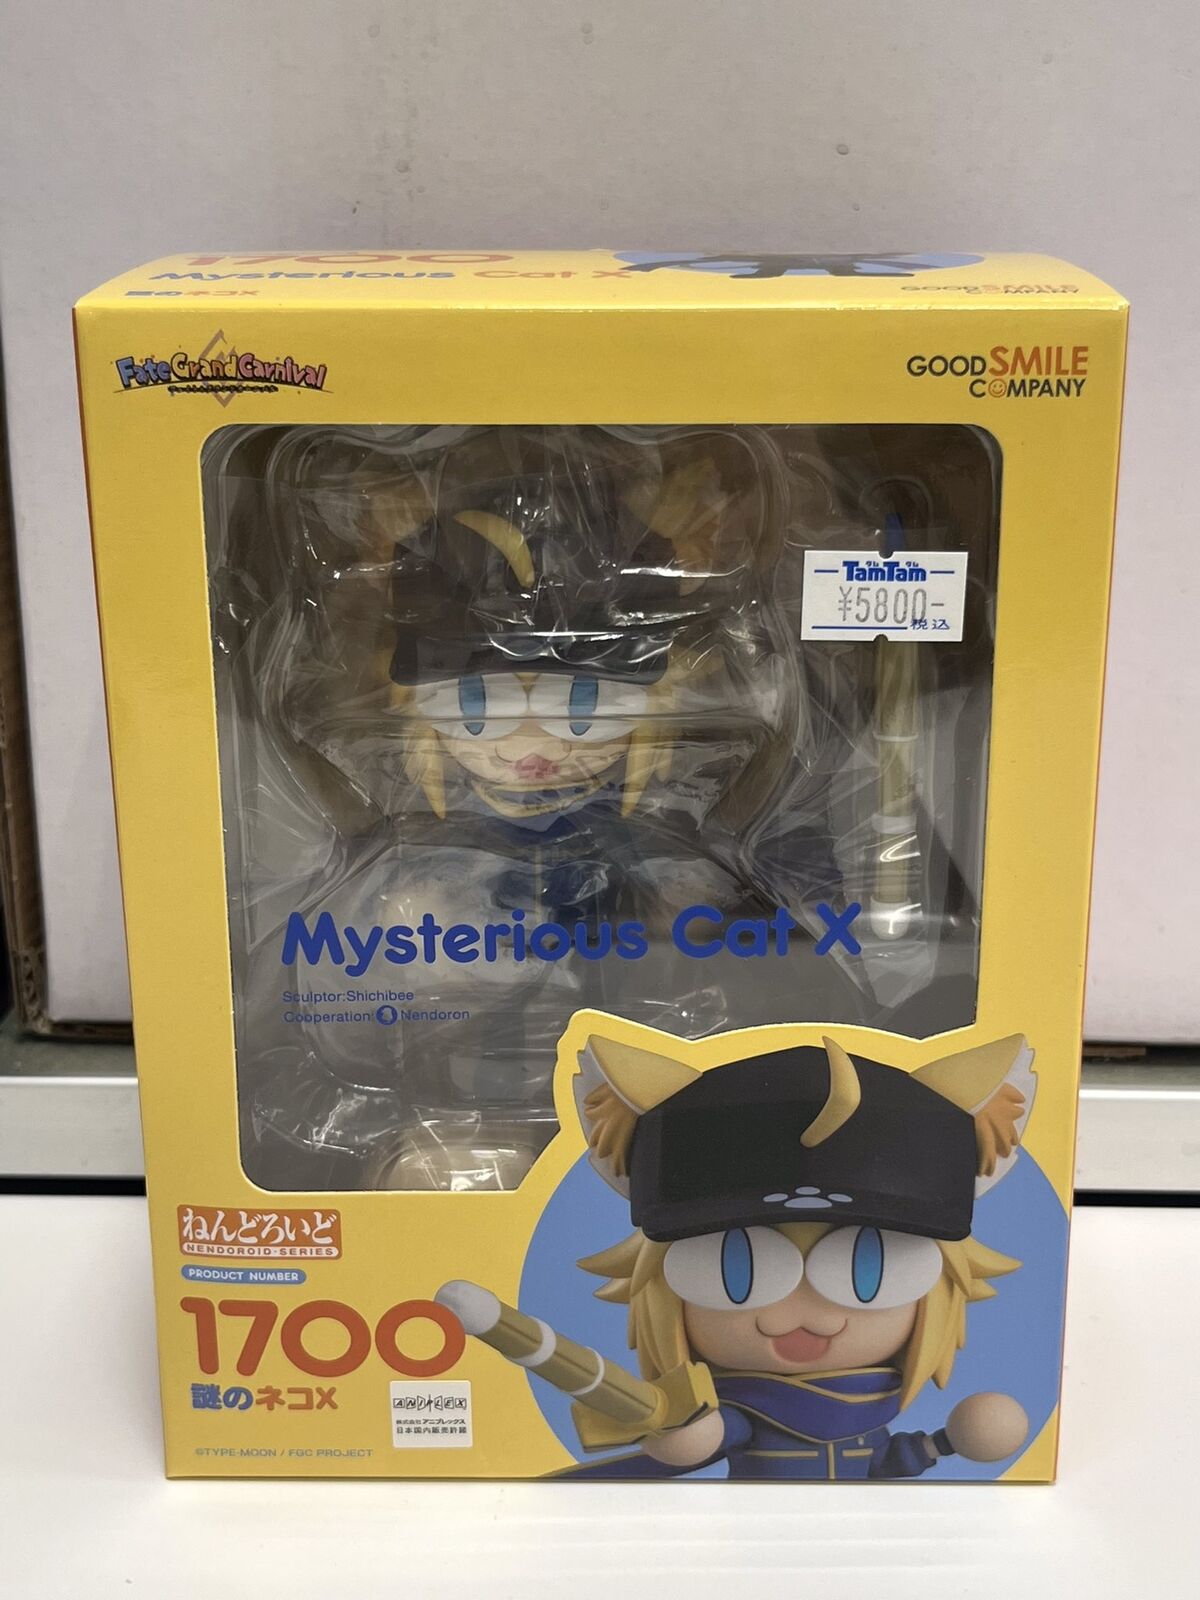 Nendoroid Fate/Grand Carnival Mysterious Neko X figure (Expedited Shipping)